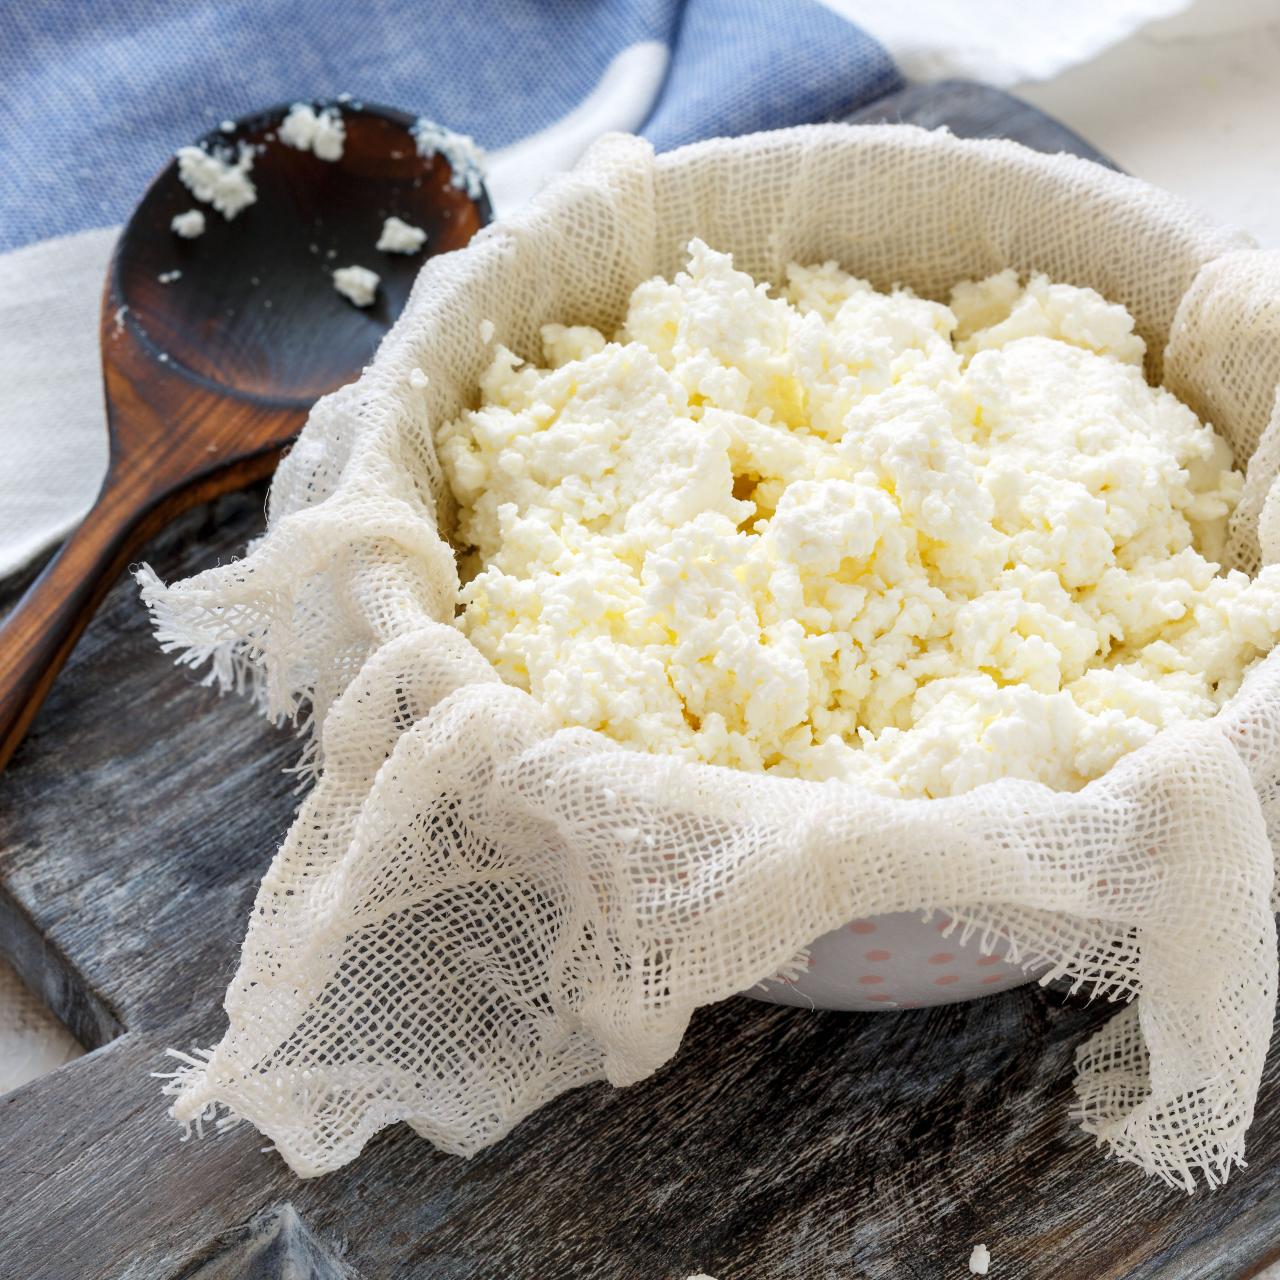 https://food.fnr.sndimg.com/content/dam/images/food/fullset/2022/06/23/cheesecloth-bowl-cheese-curd-wooden-spoon-wood-surface-linen.jpg.rend.hgtvcom.1280.1280.suffix/1655962768767.jpeg